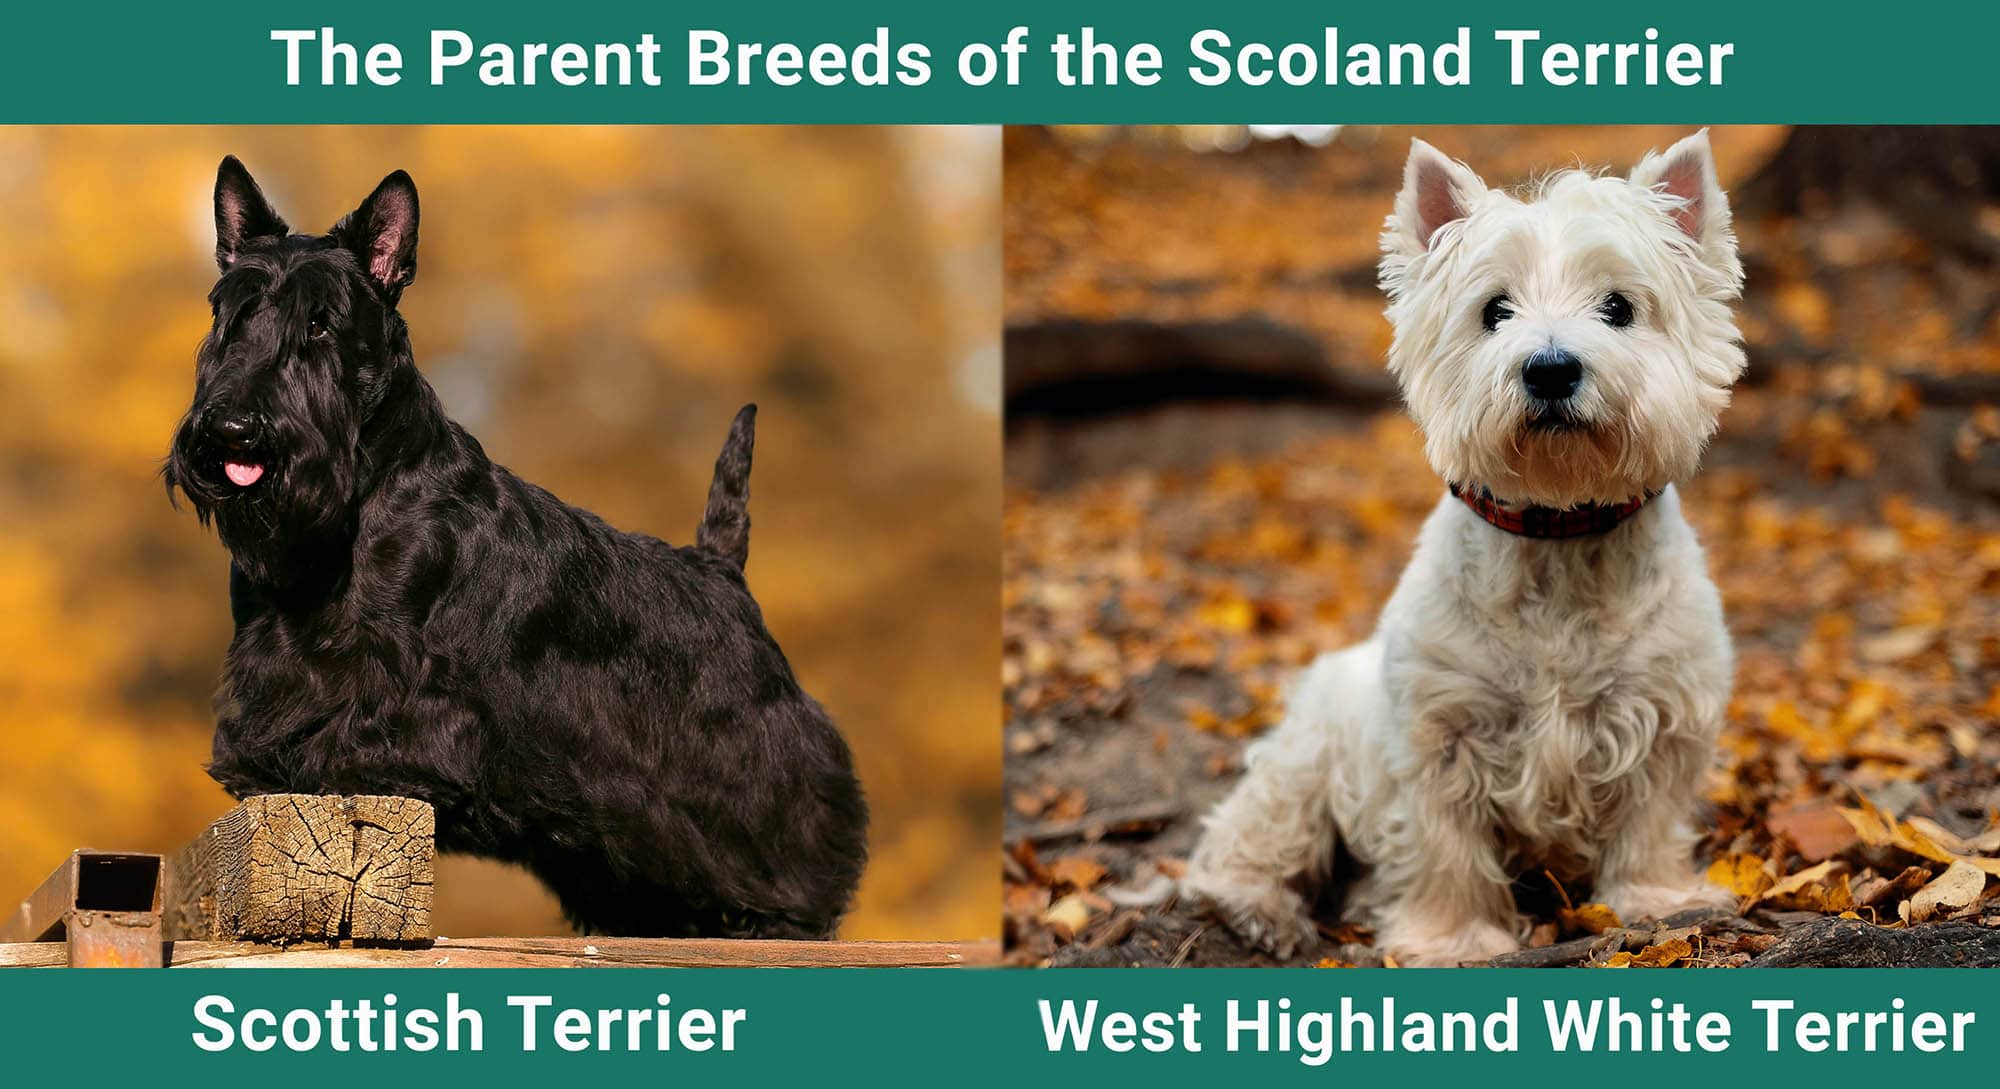 The Parent Breeds of the Scoland Terrier